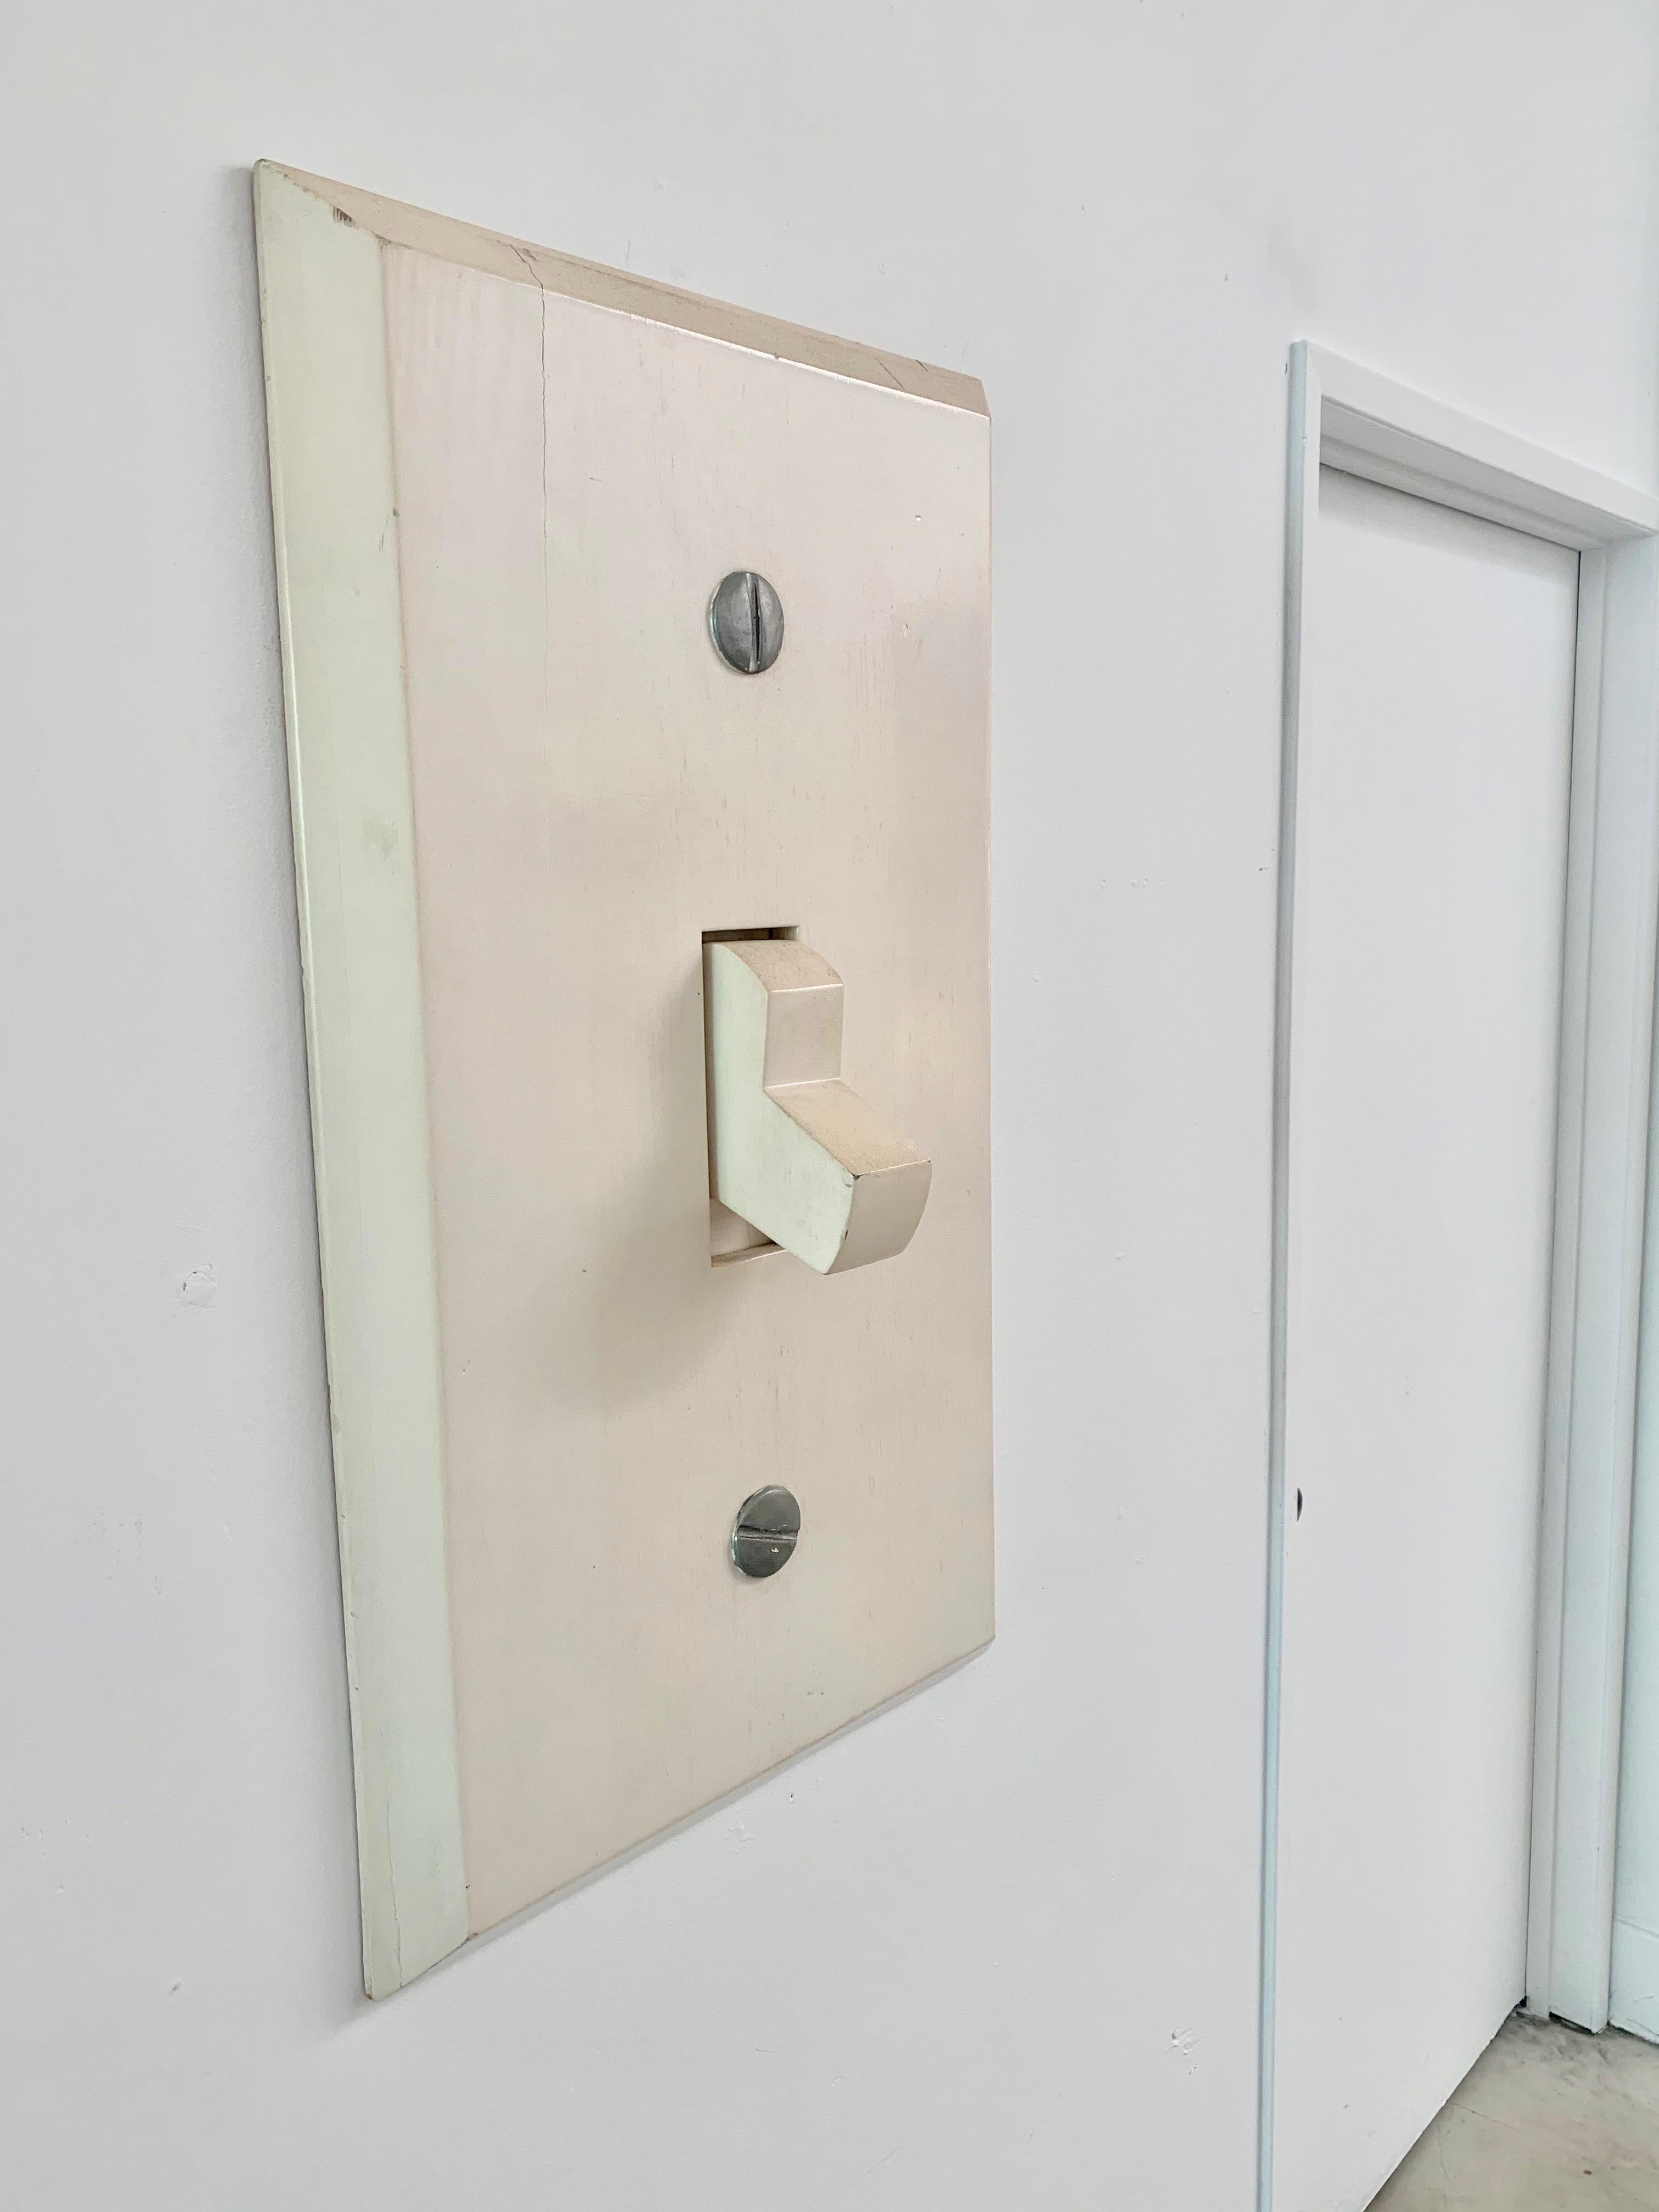 Massive handmade wood pop art light switch. Entire piece is made of wood. Super unique piece of pop art. Great vintage condition.